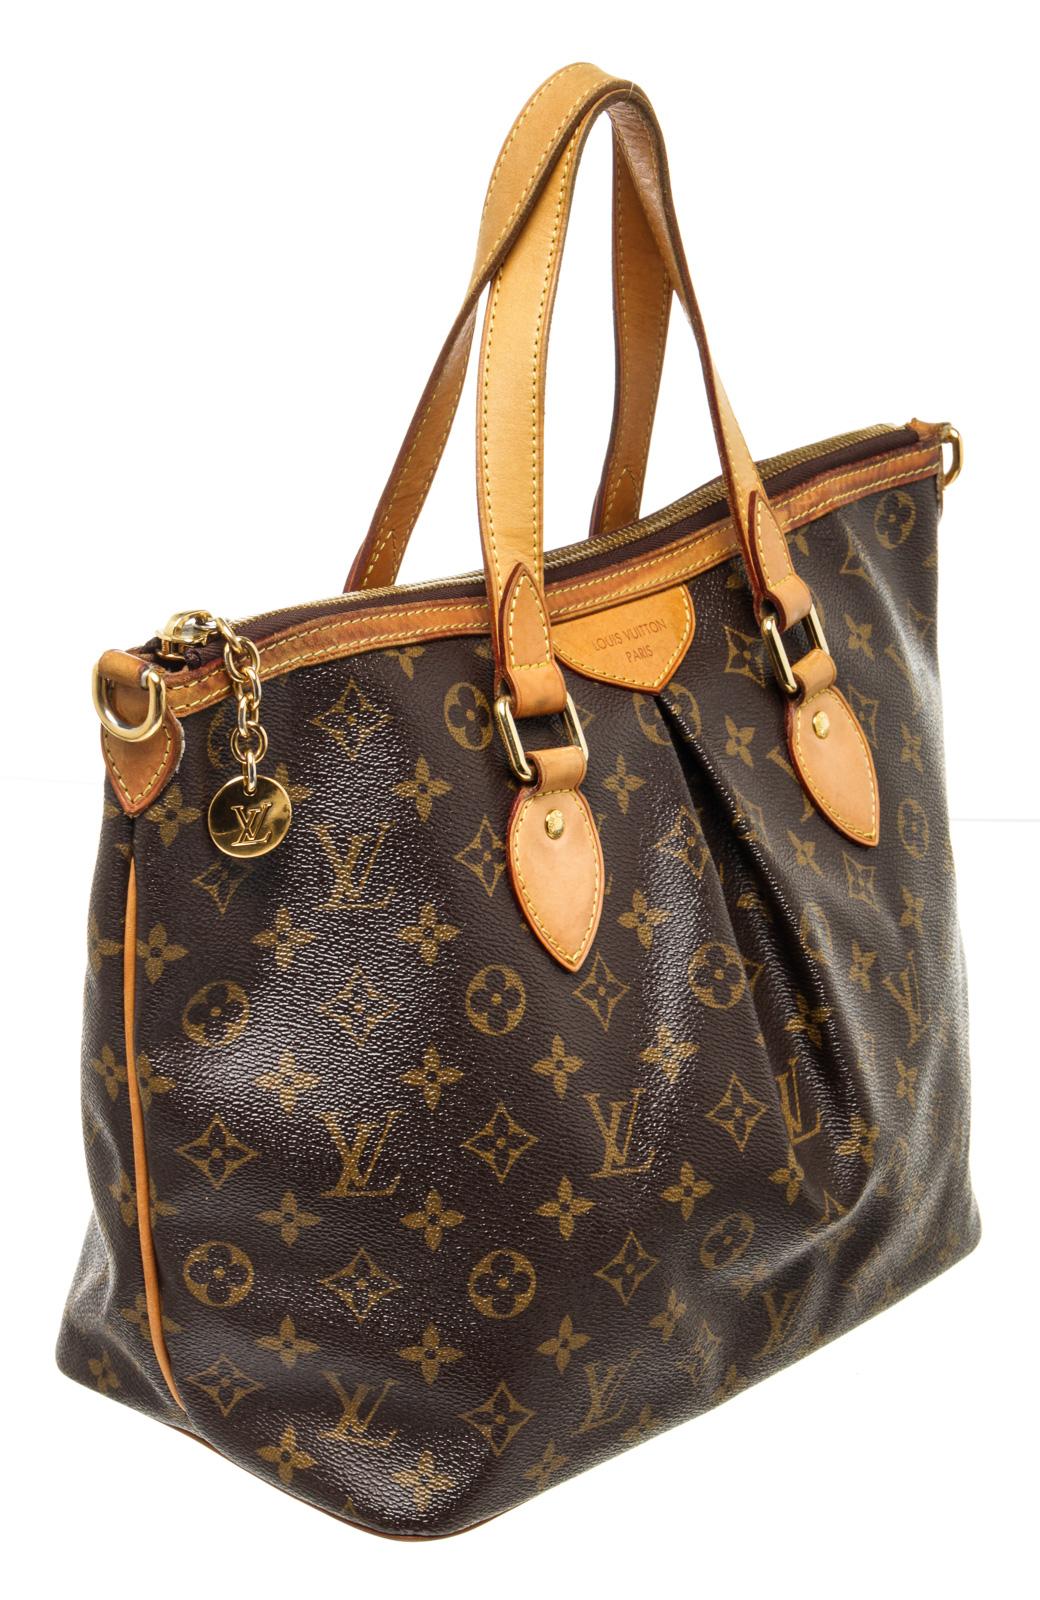 Louis Vuitton Brown Palermo PM Totes Bag In Good Condition For Sale In Irvine, CA